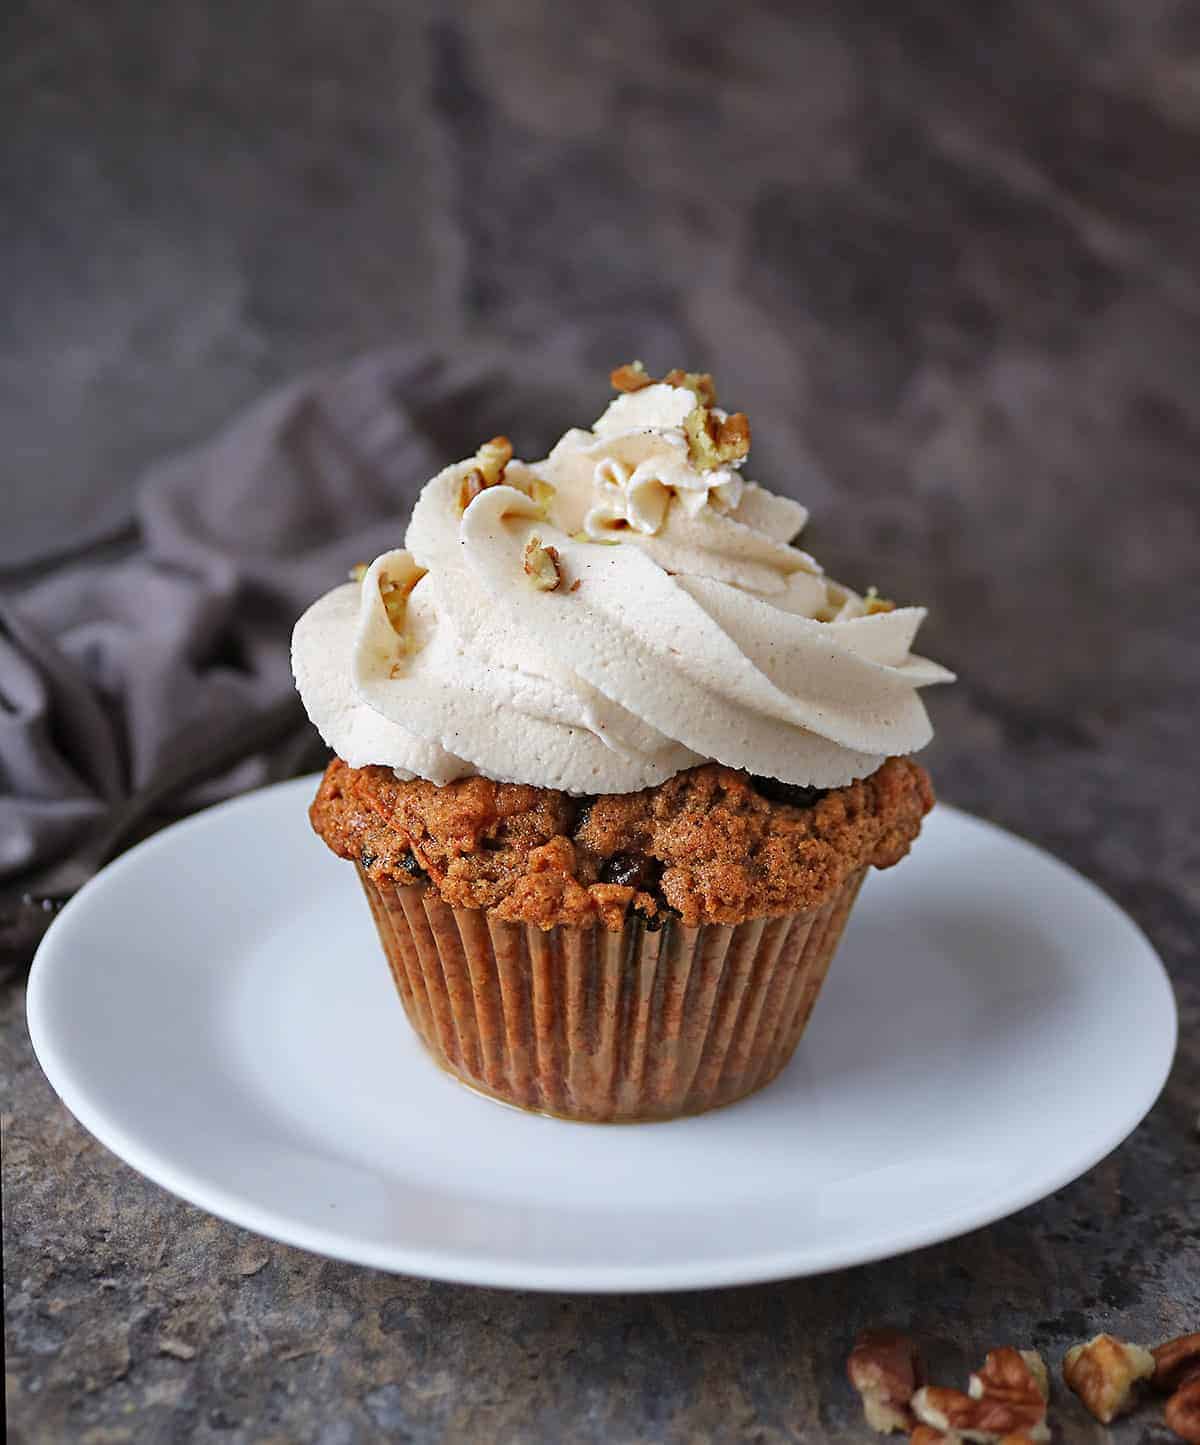 One tasty Easy No-Butter Carrot Cake Cupcake.